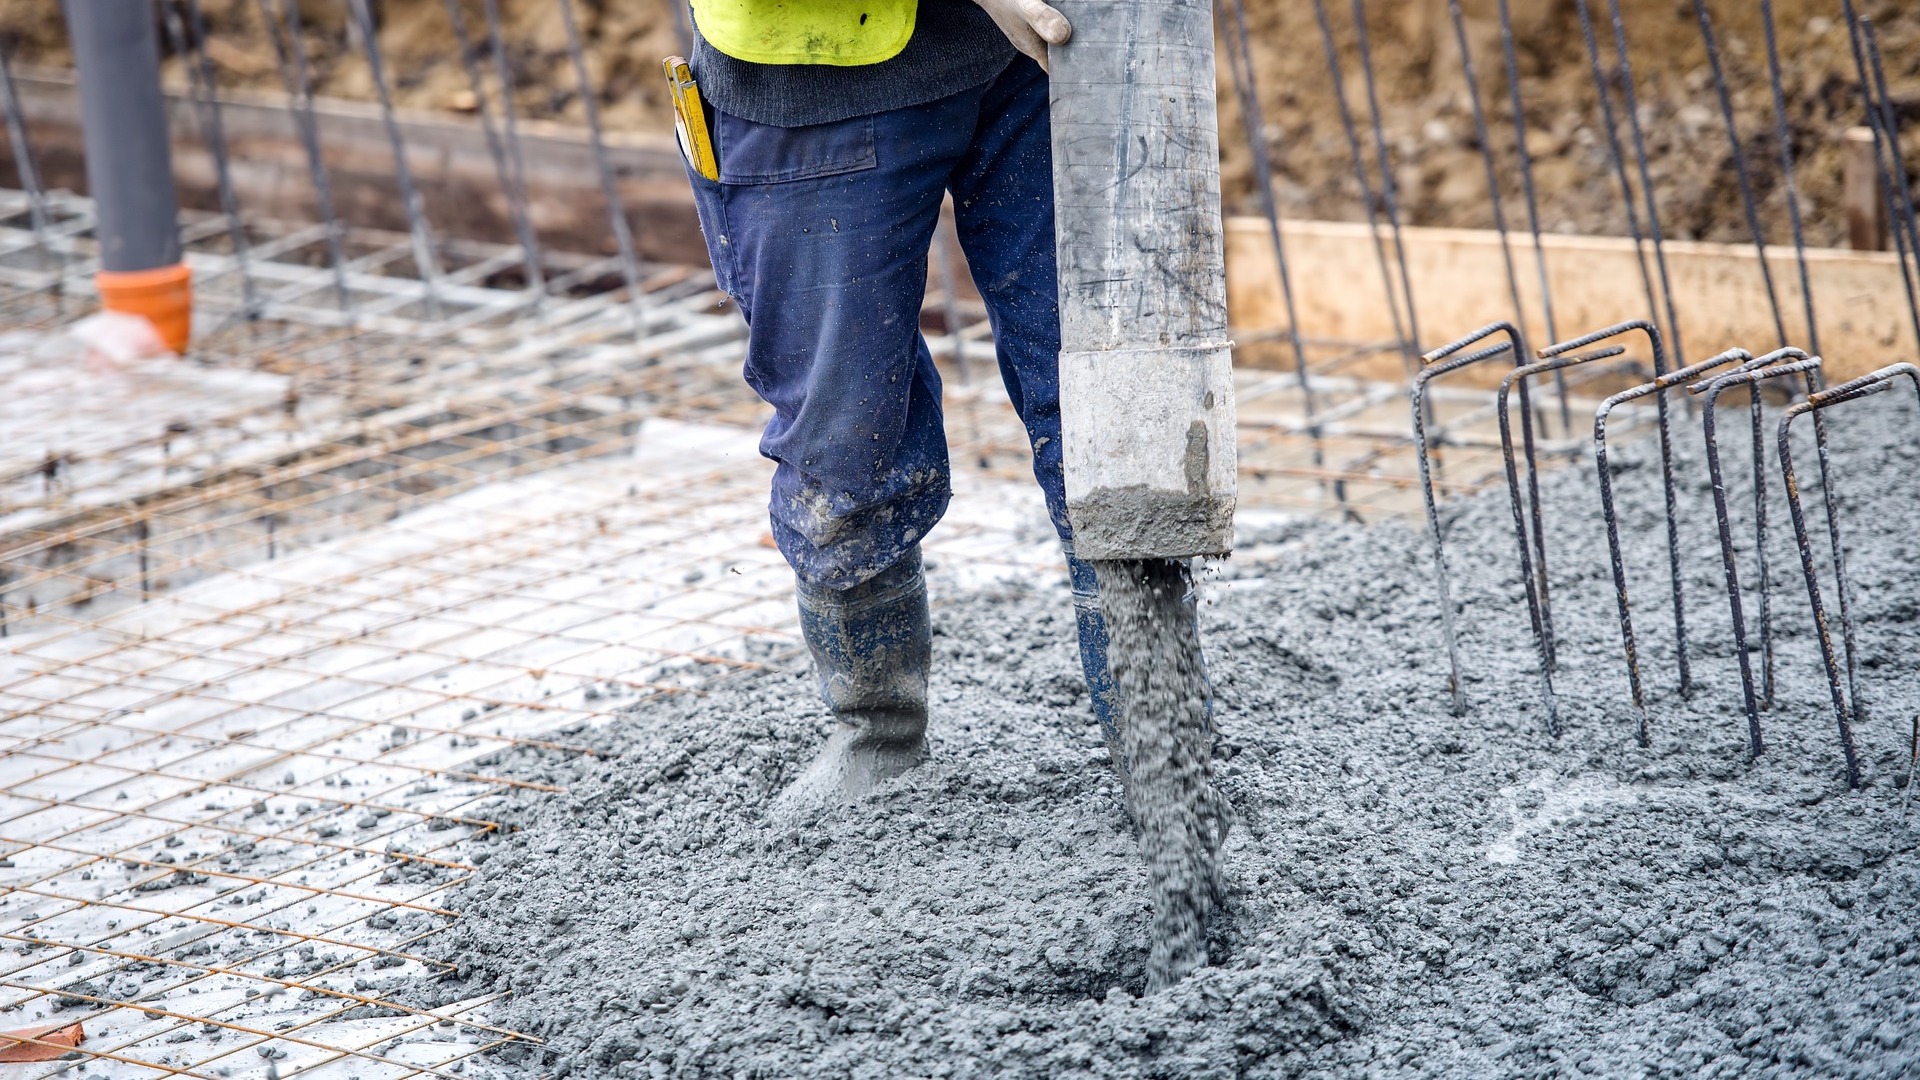 Stock photo of a worker pouring concrete from a mixing truck over a bed of rebar steel.